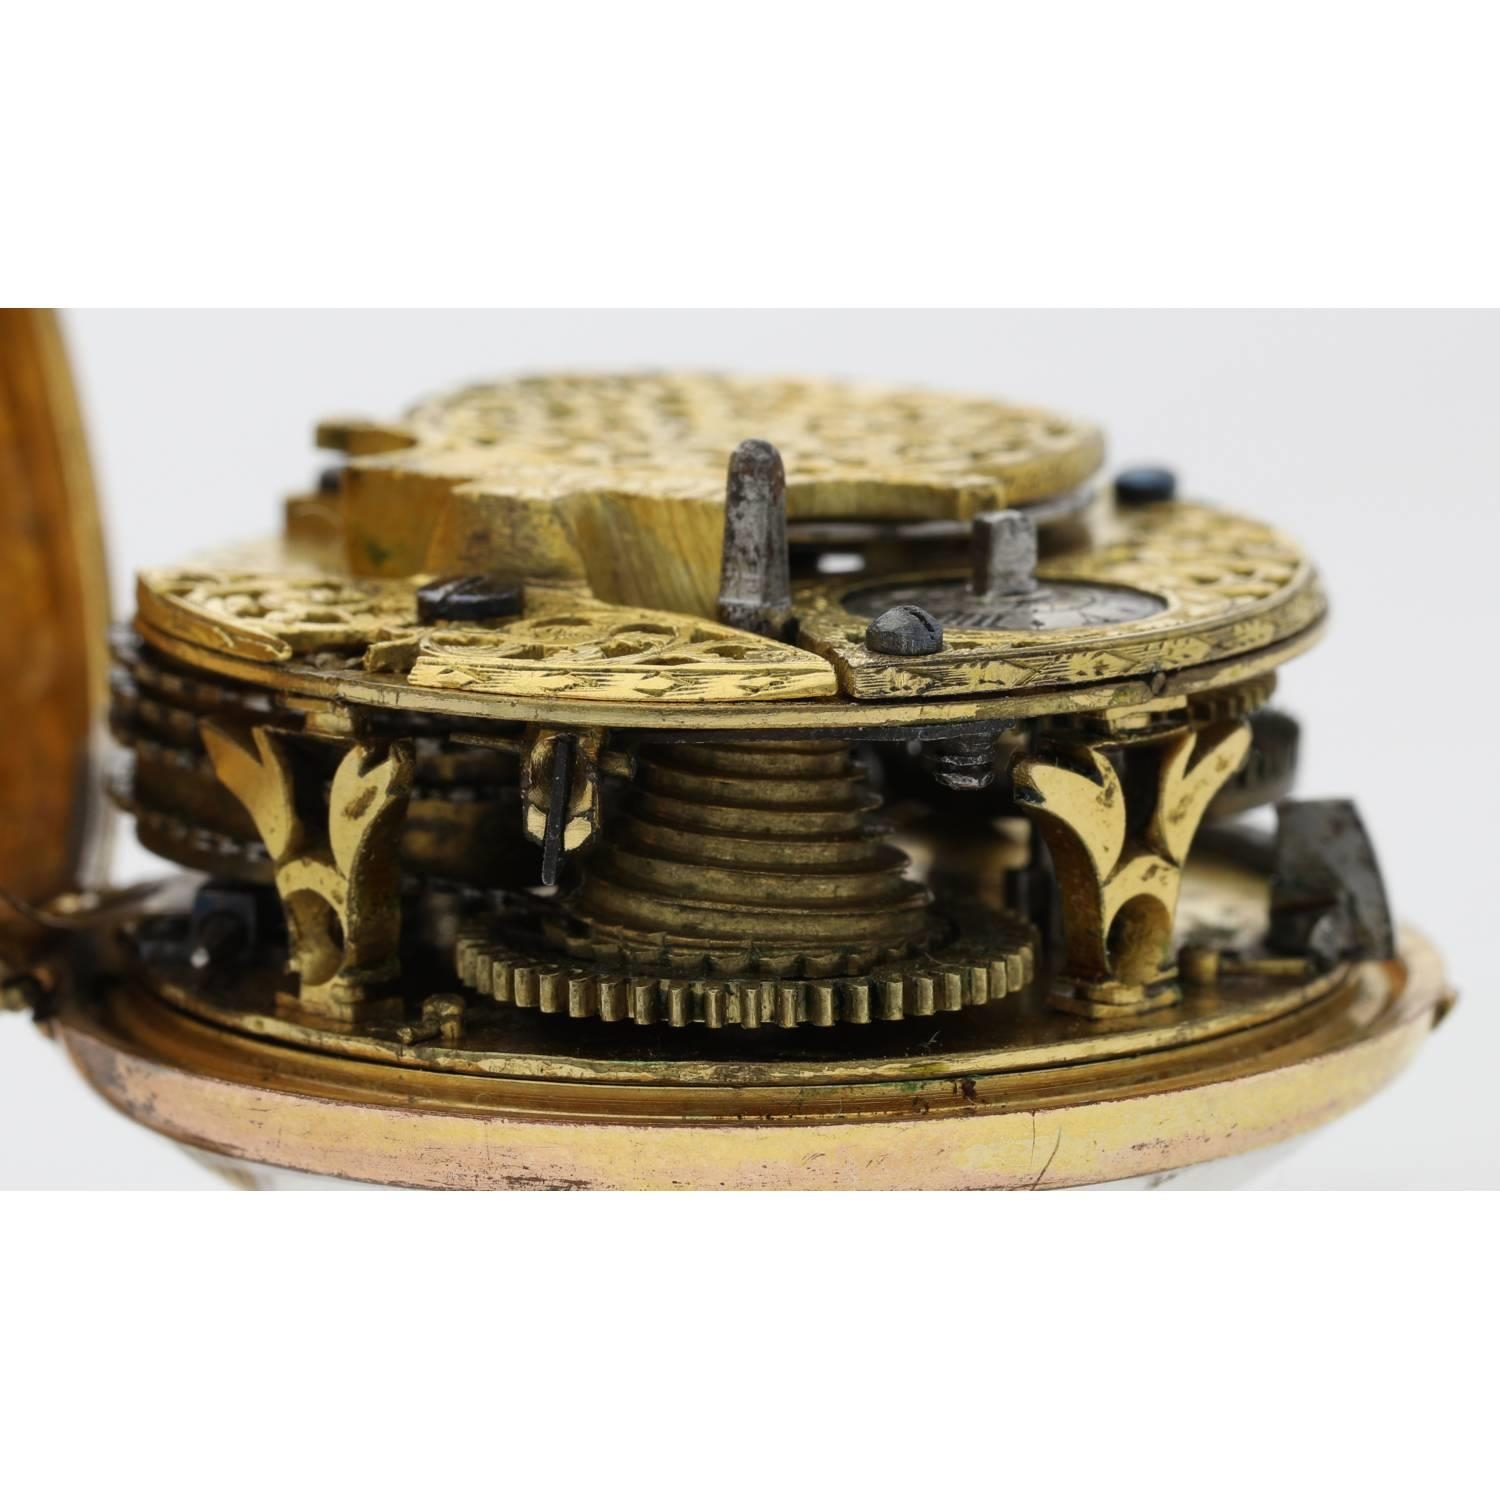 Symons, London - late 17th century English gold and gilt pair cased verge pocket watch, signed - Image 5 of 11